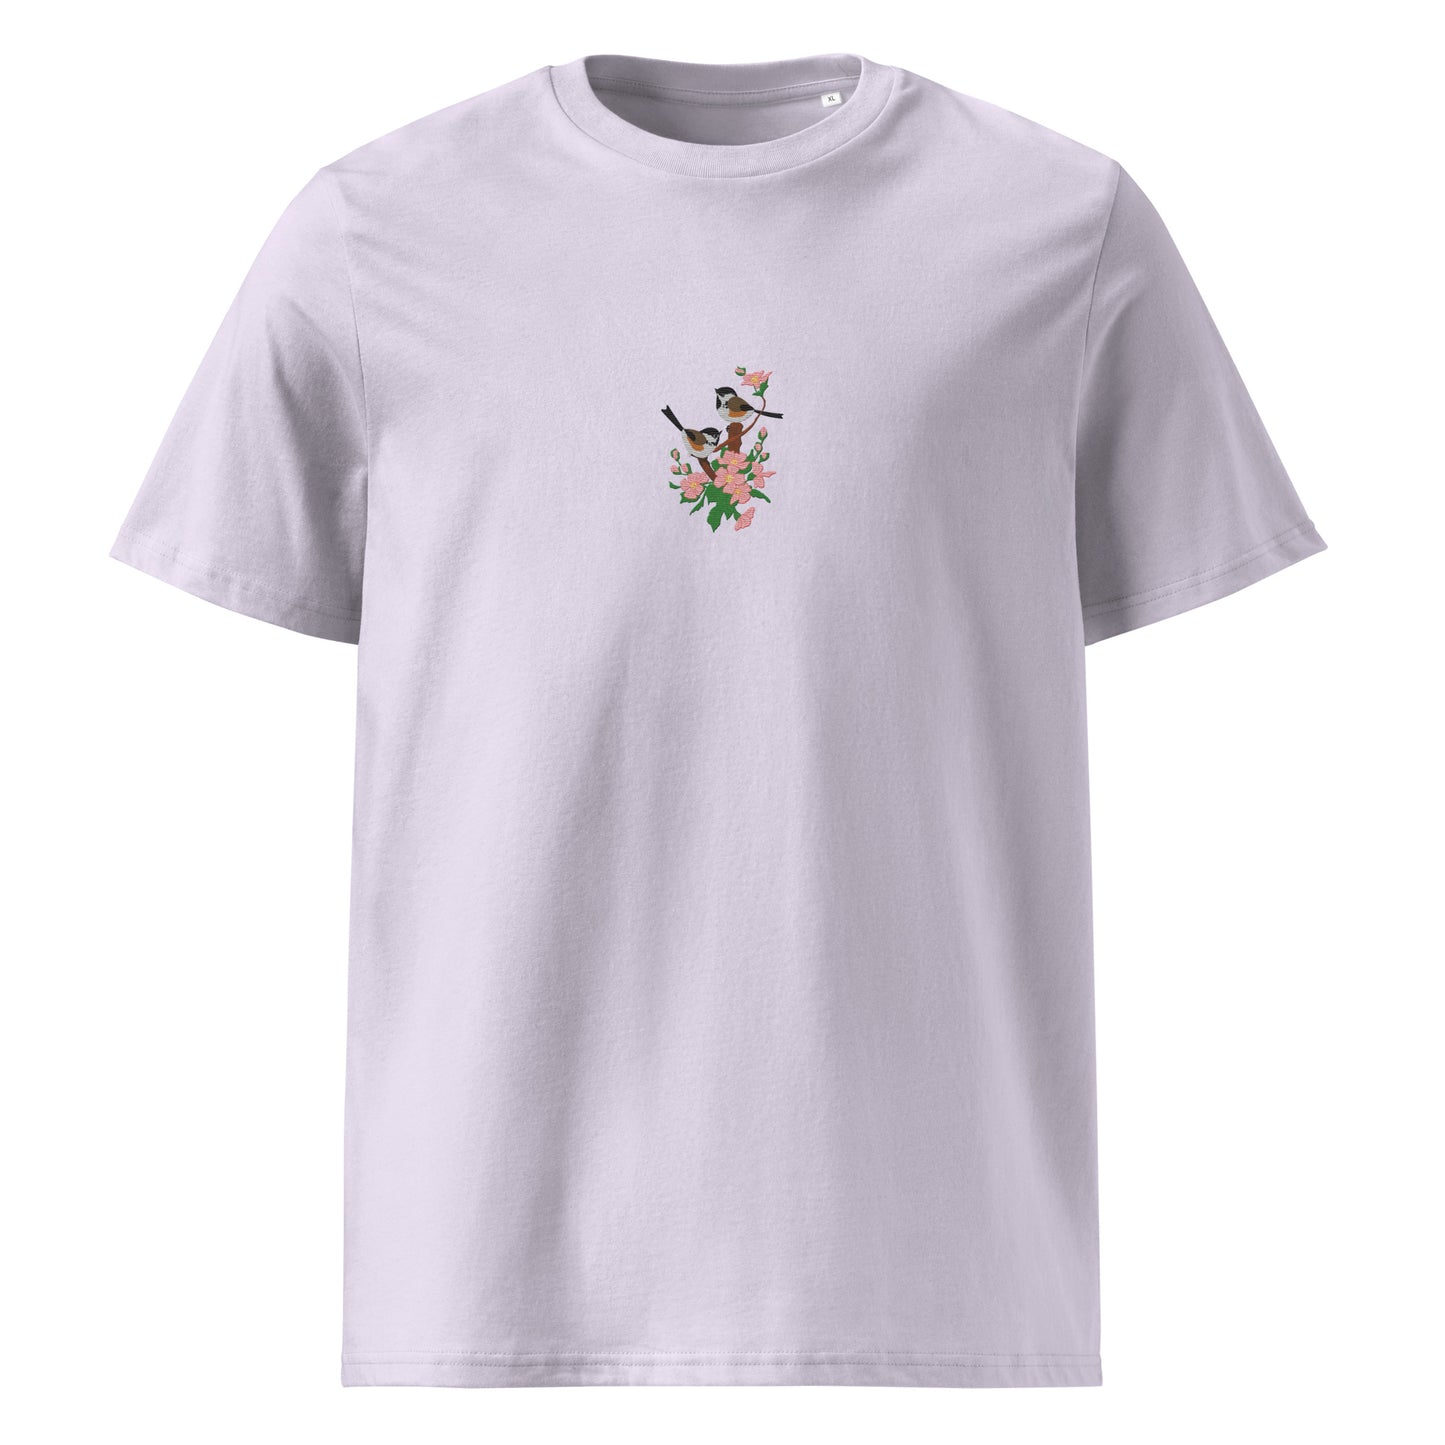 Coal Tits and cherry tree blossoms - Unisex organic cotton t-shirt